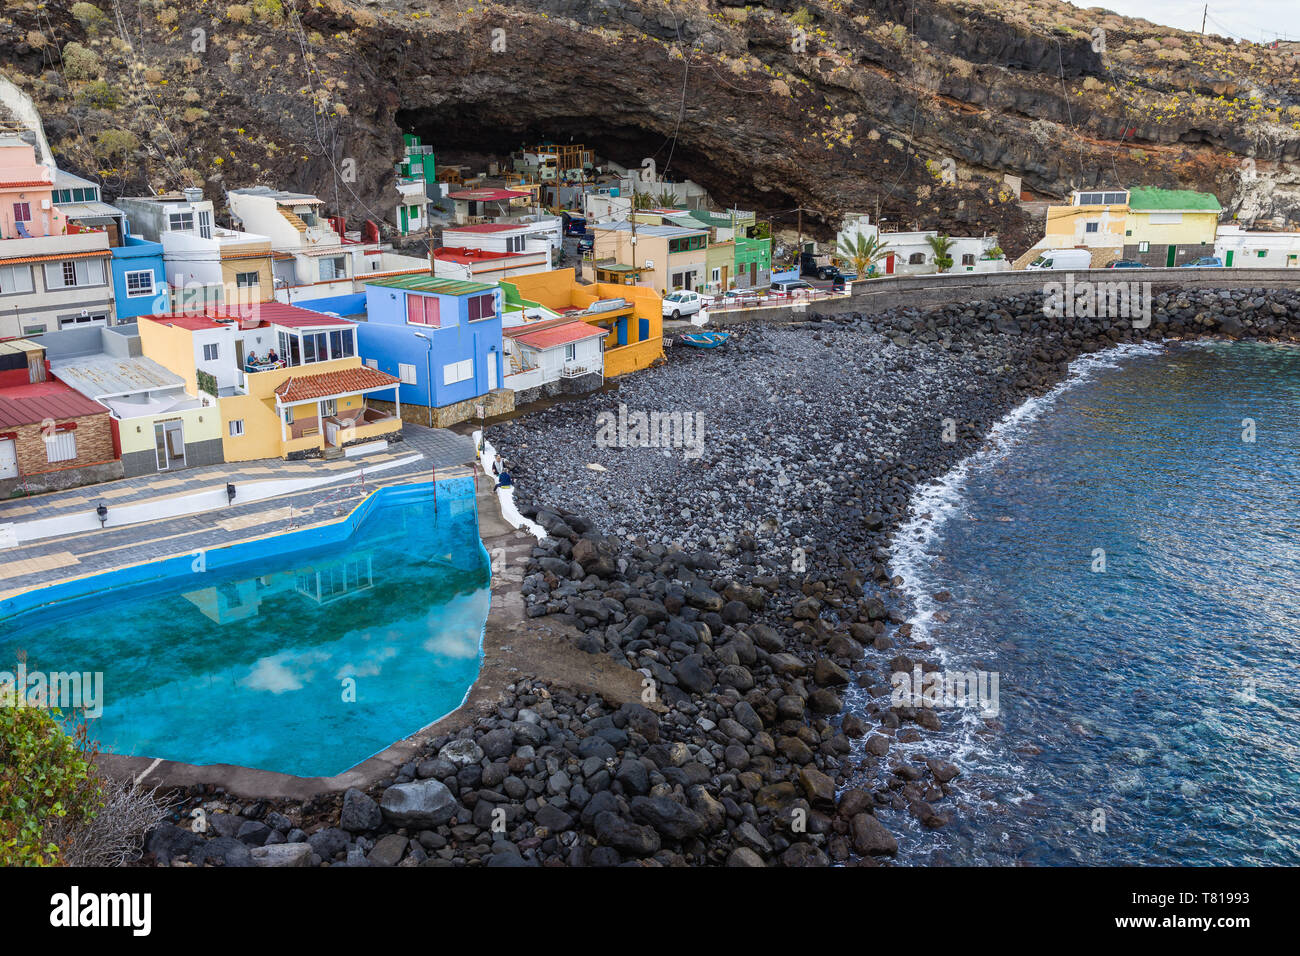 The picturesque village of Los Barrancos on the Atlantic coast. Tenerife, Canary Islands, Spain Stock Photo